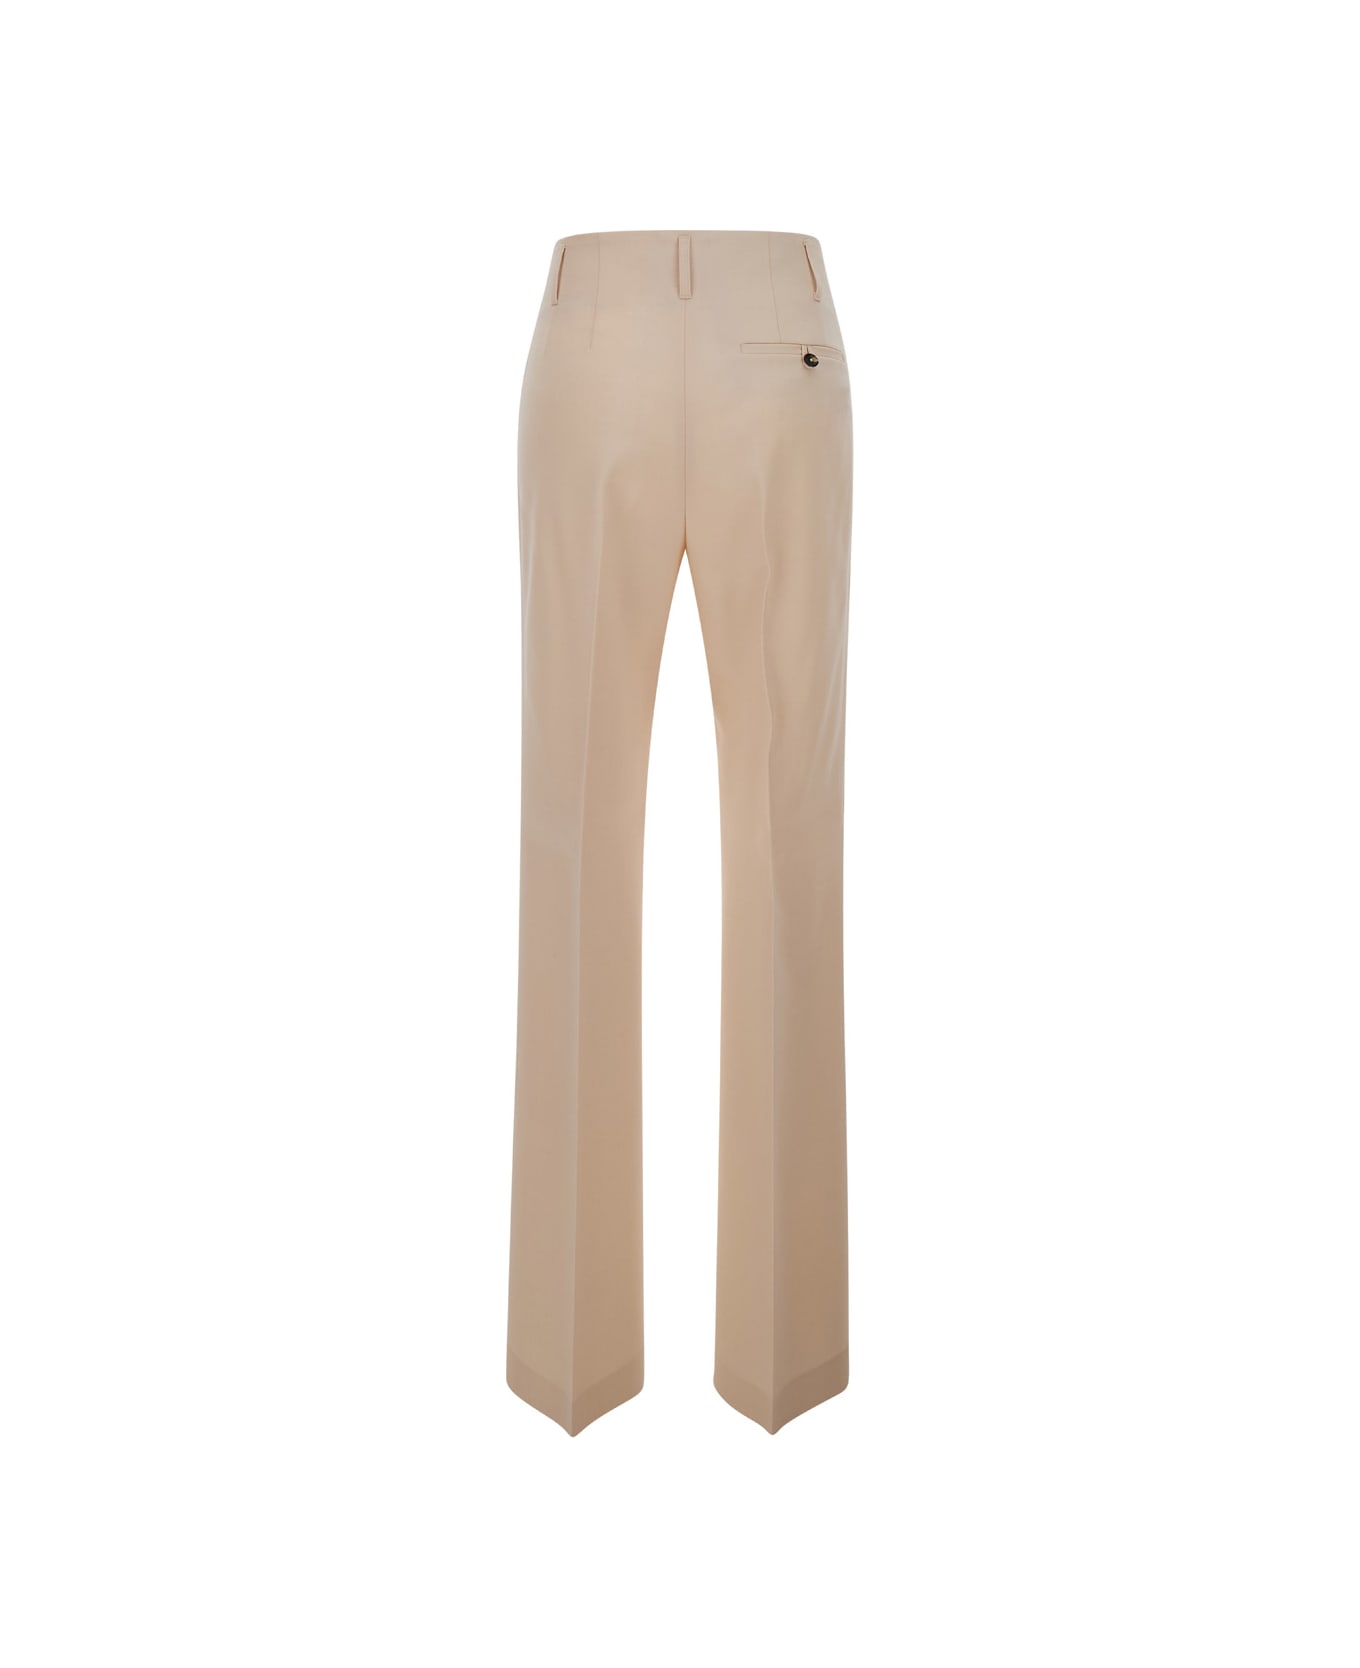 Philosophy di Lorenzo Serafini Ivory White High Waisted Tailored Trousers In Technical Fabric Woman - Beige ボトムス